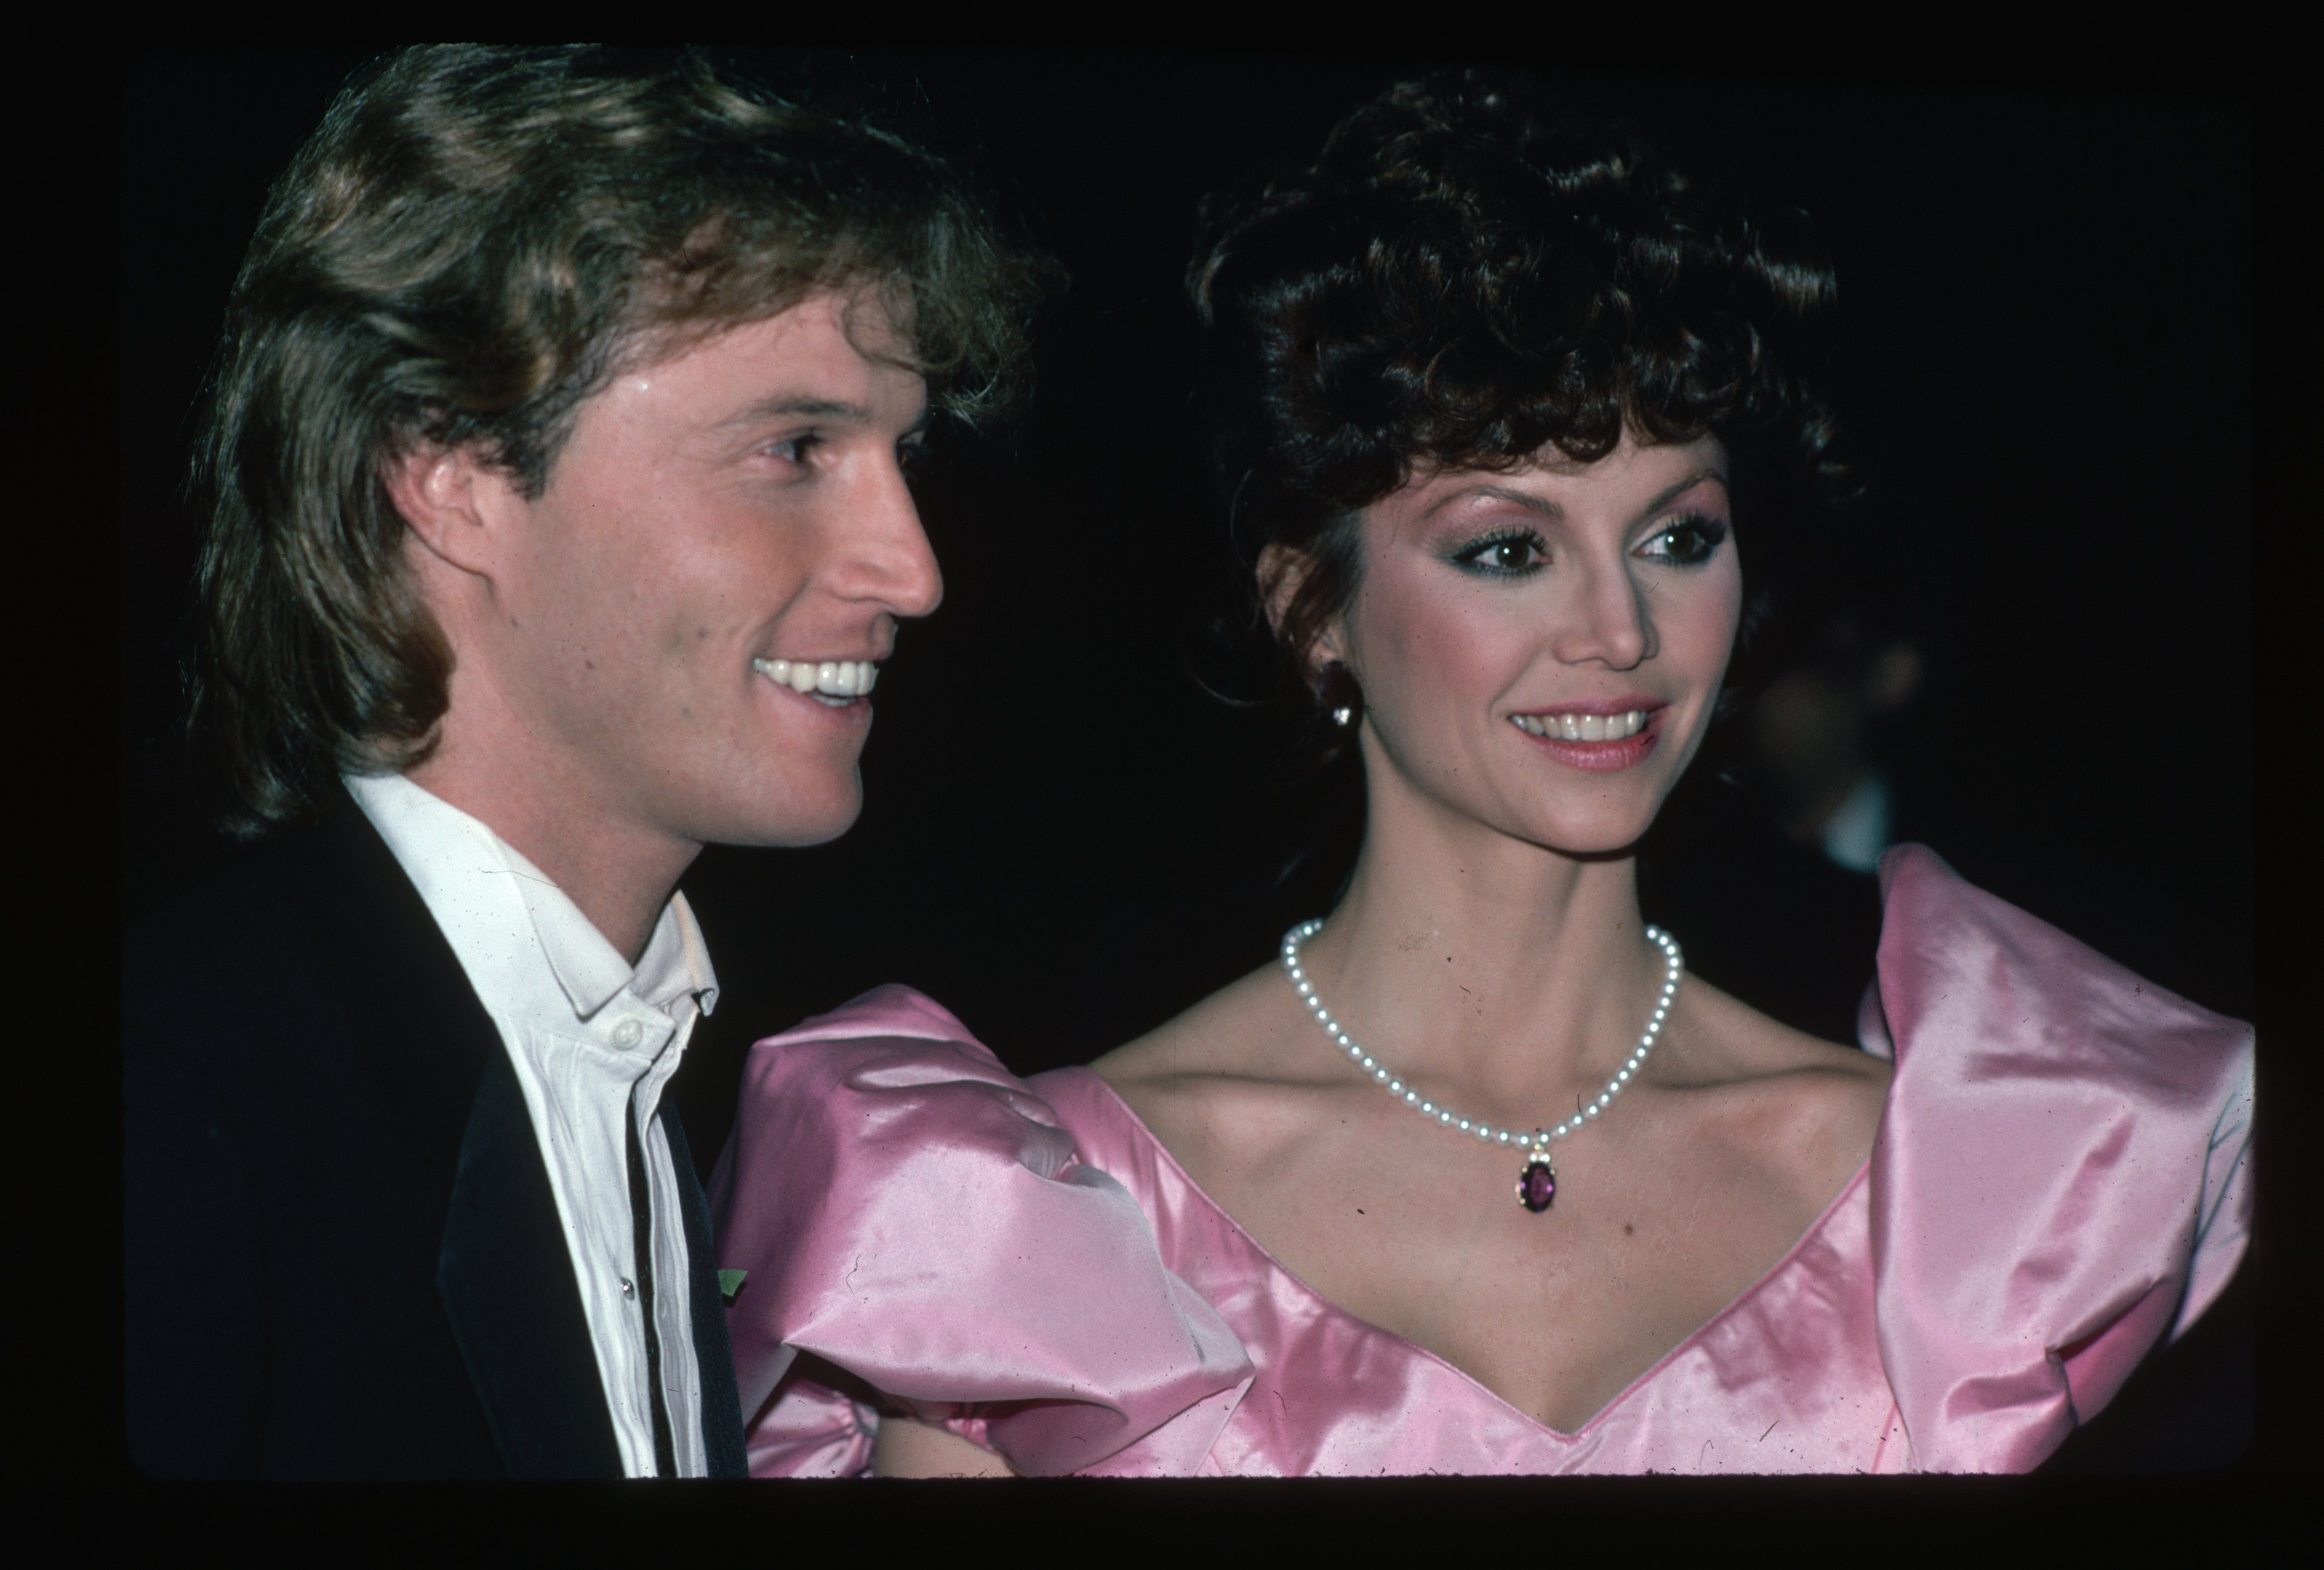  Picture shows actress, Victoria Principal, and singer, Andy Gibb, posing together. | Source: Getty Images